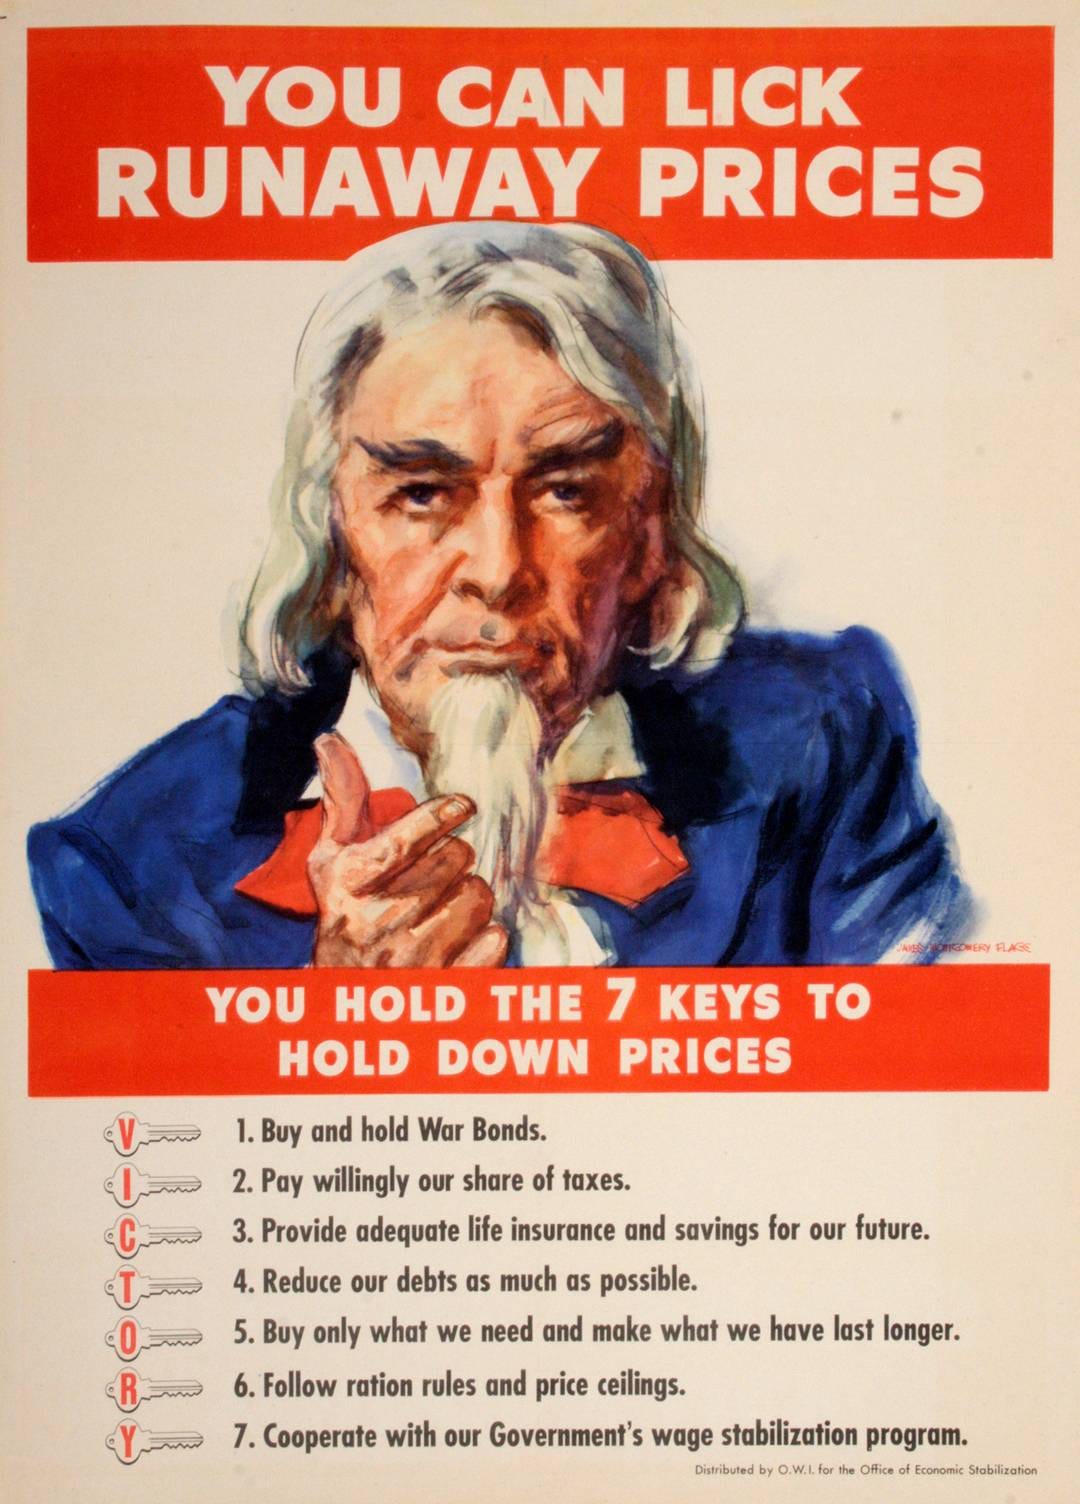 Original James Montgomery Flagg c1942 Poster - You Can Lick Runaway Prices  – The Ross Art Group